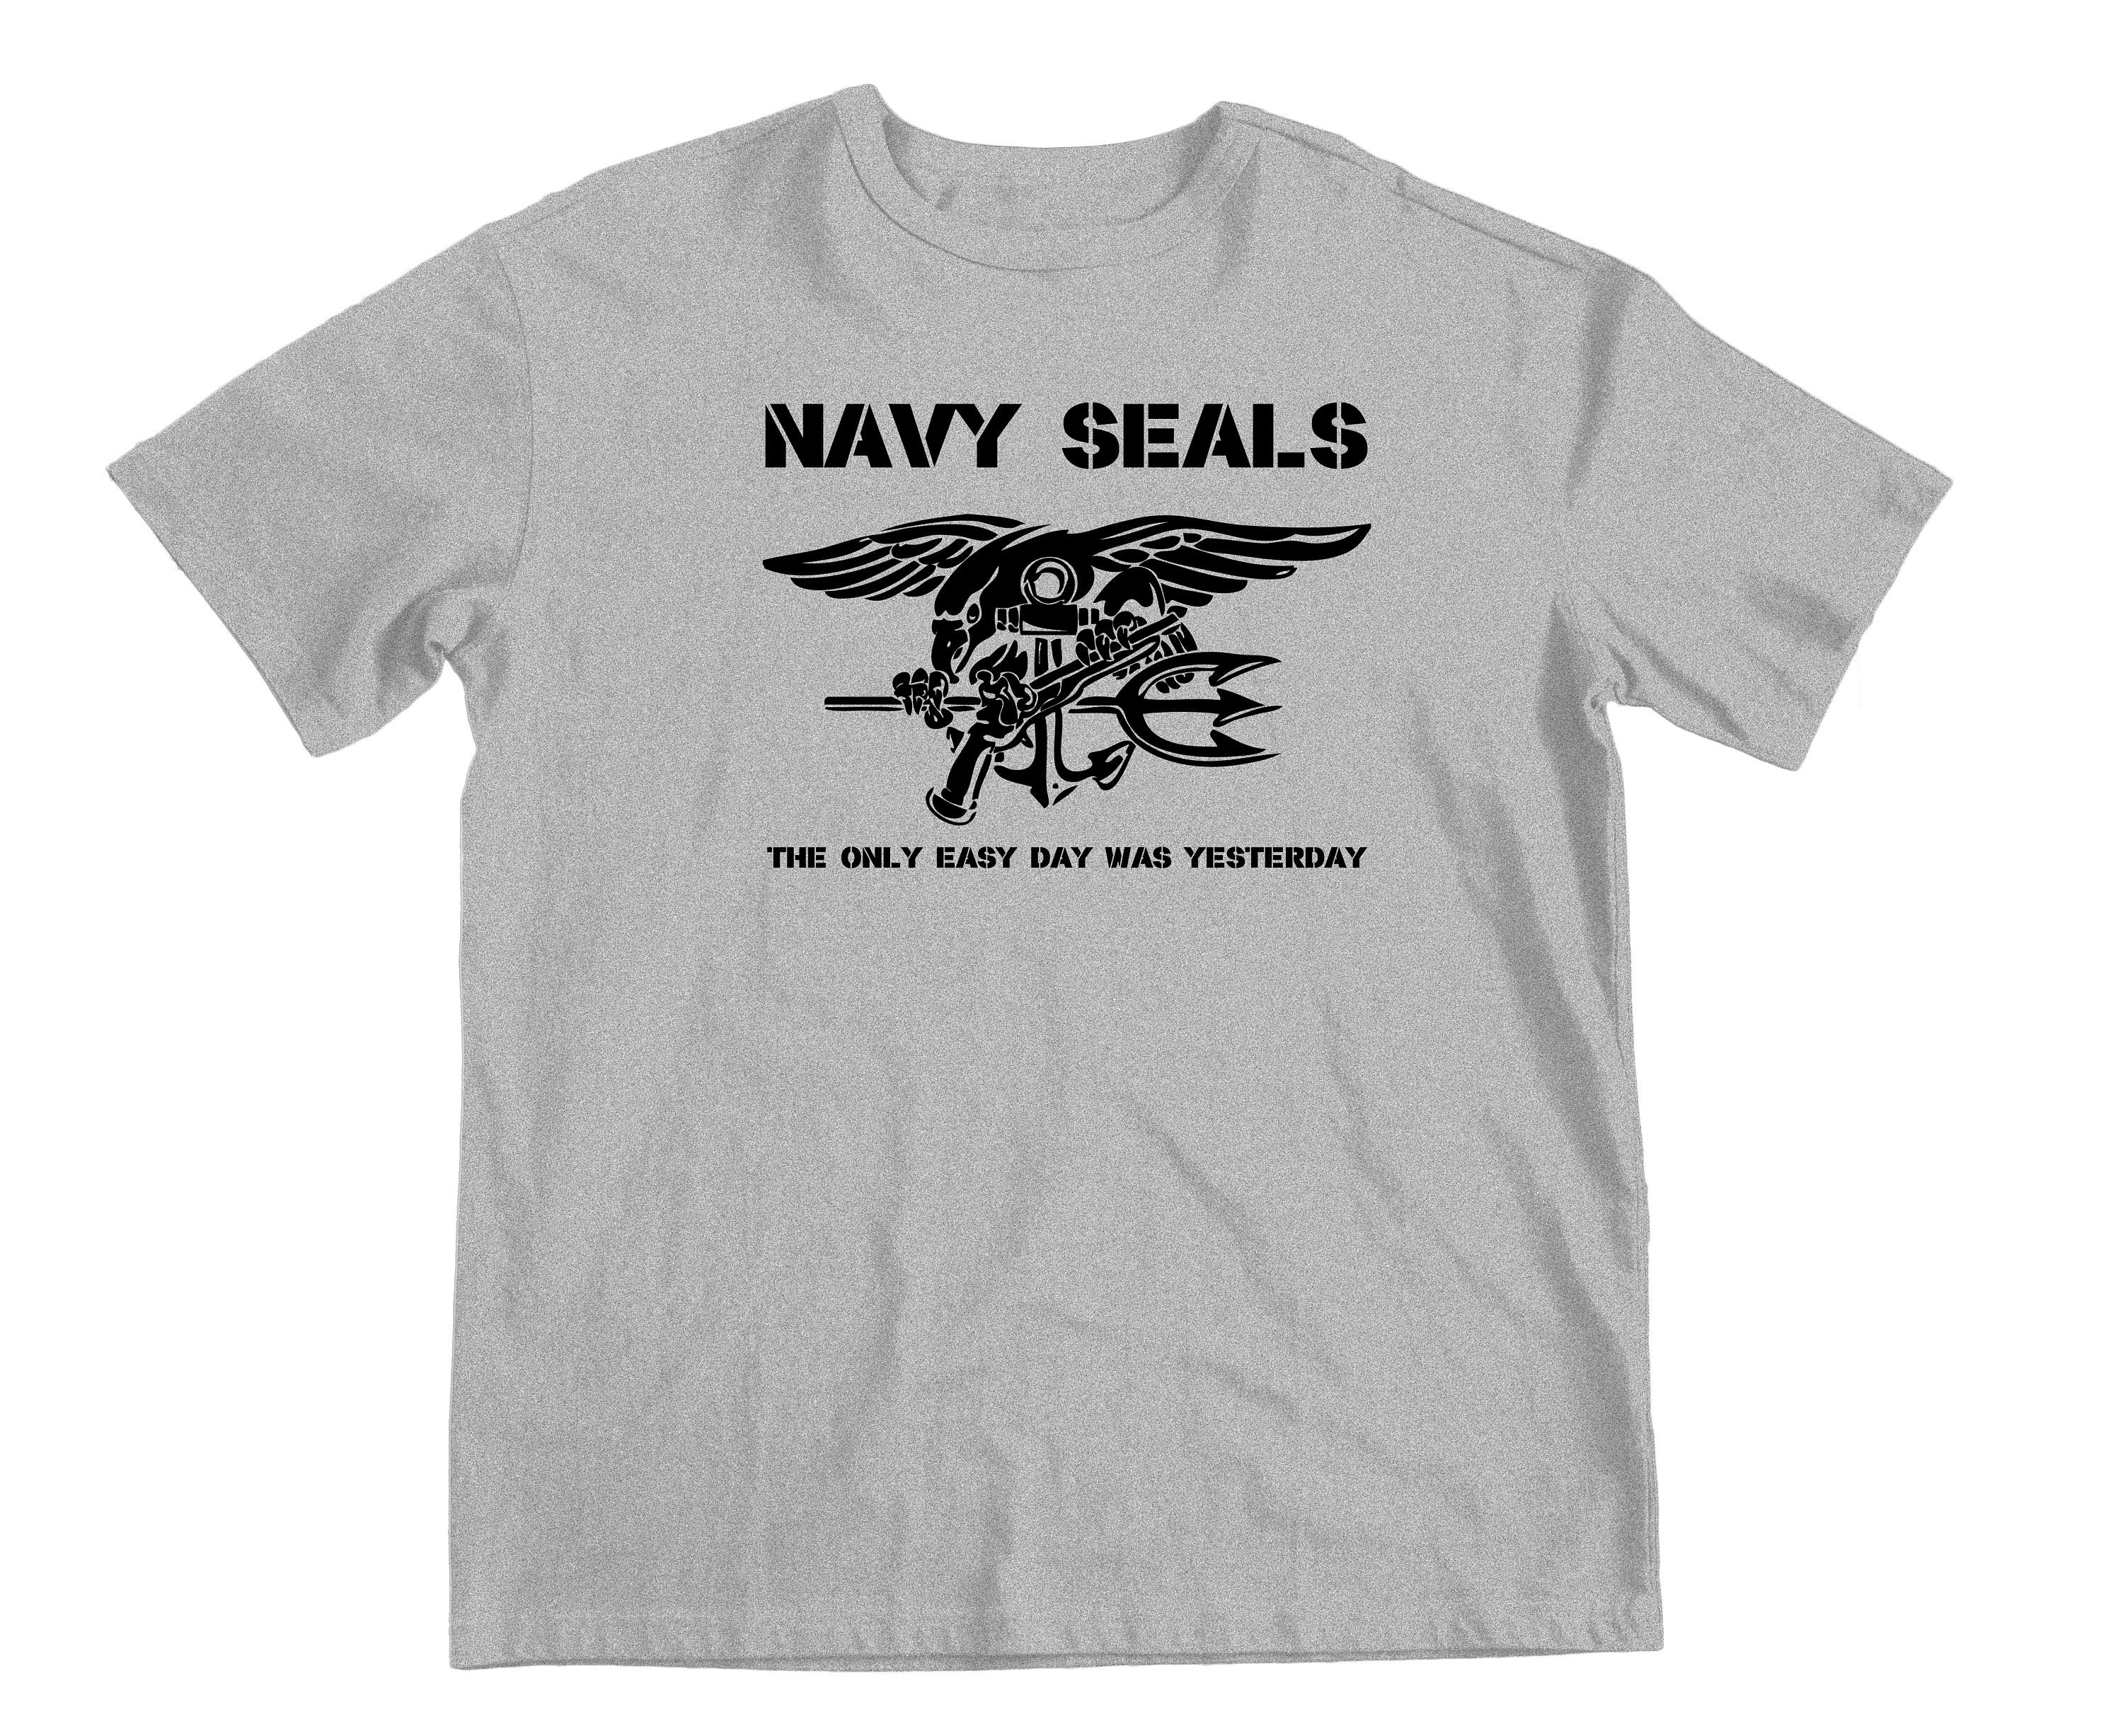 US NAVY SEALS T-shirt Tee the Only Easy Day Was Yesterday Team | Etsy